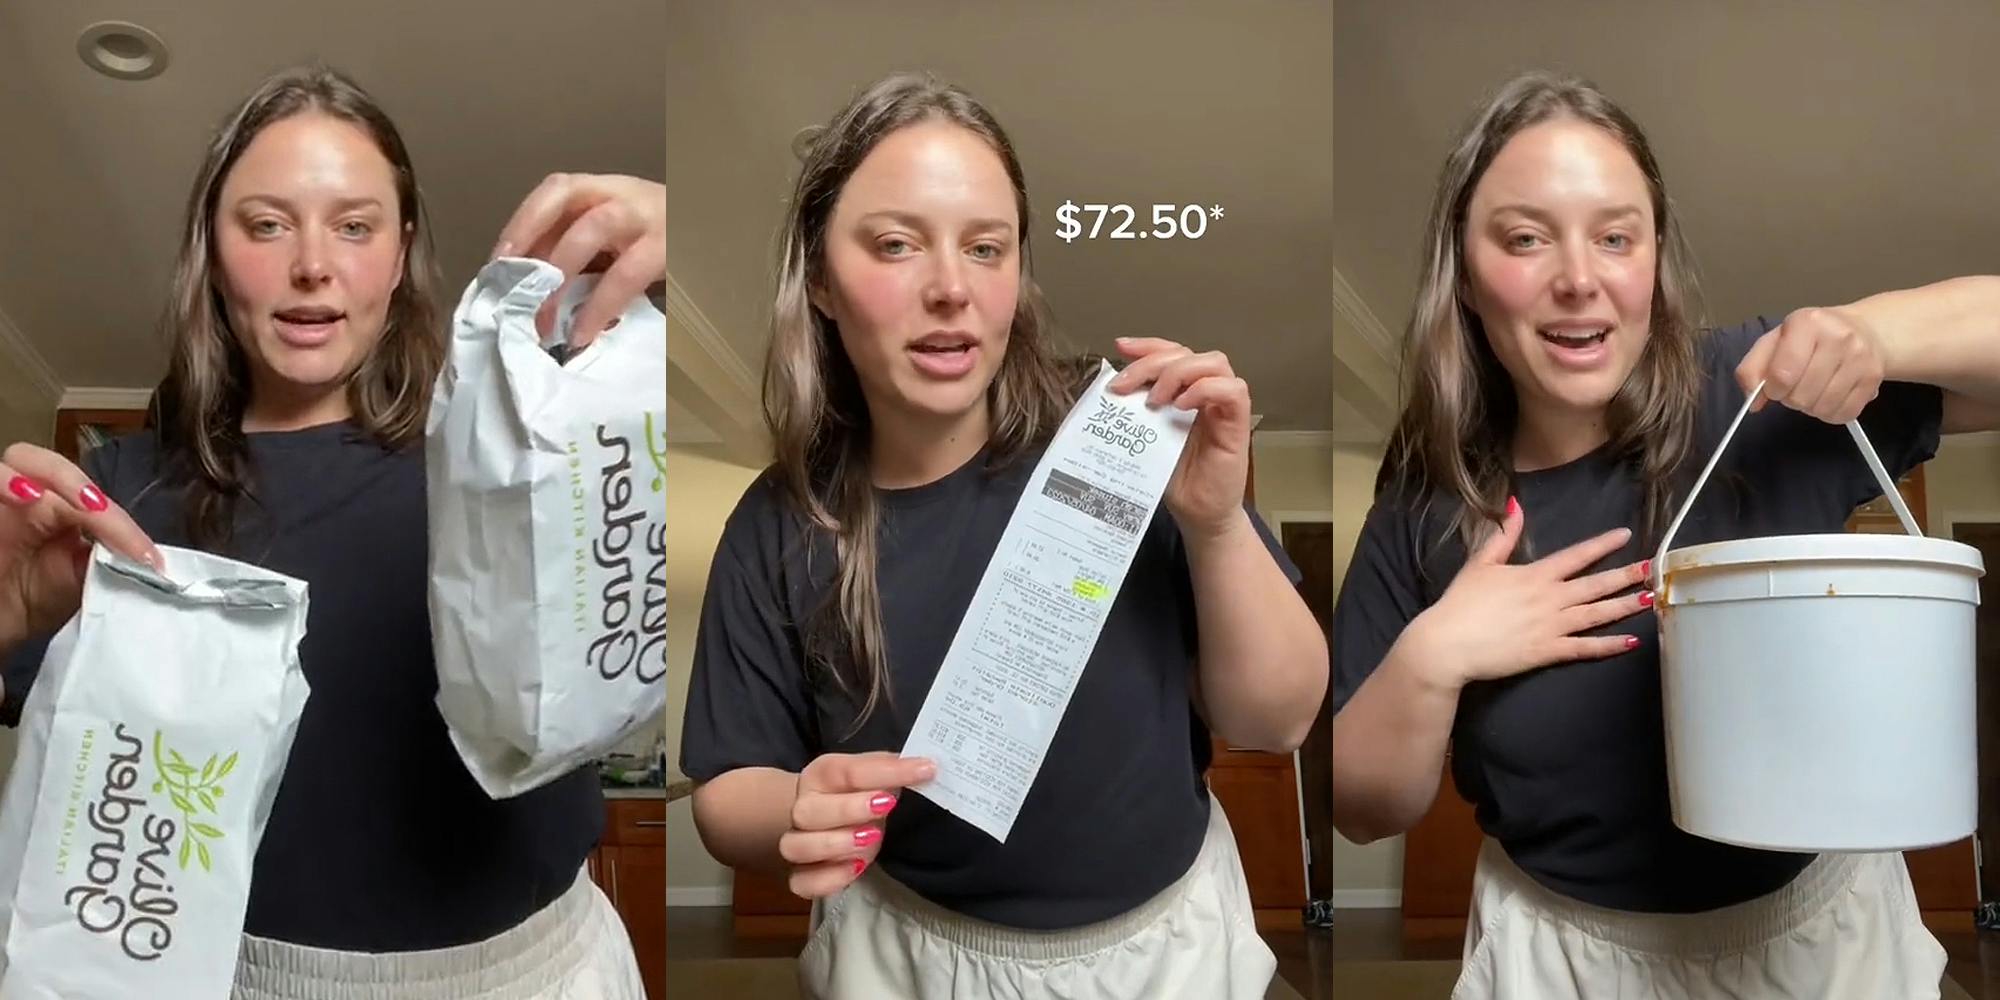 Olive Garden customer speaking in front of tan wall holding Olive Garden breadsticks in bag (l) Olive Garden customer speaking in front of tan wall holding receipt with caption "$72.50" (c) Olive Garden customer speaking in front of tan wall holding bucket of soup (r)